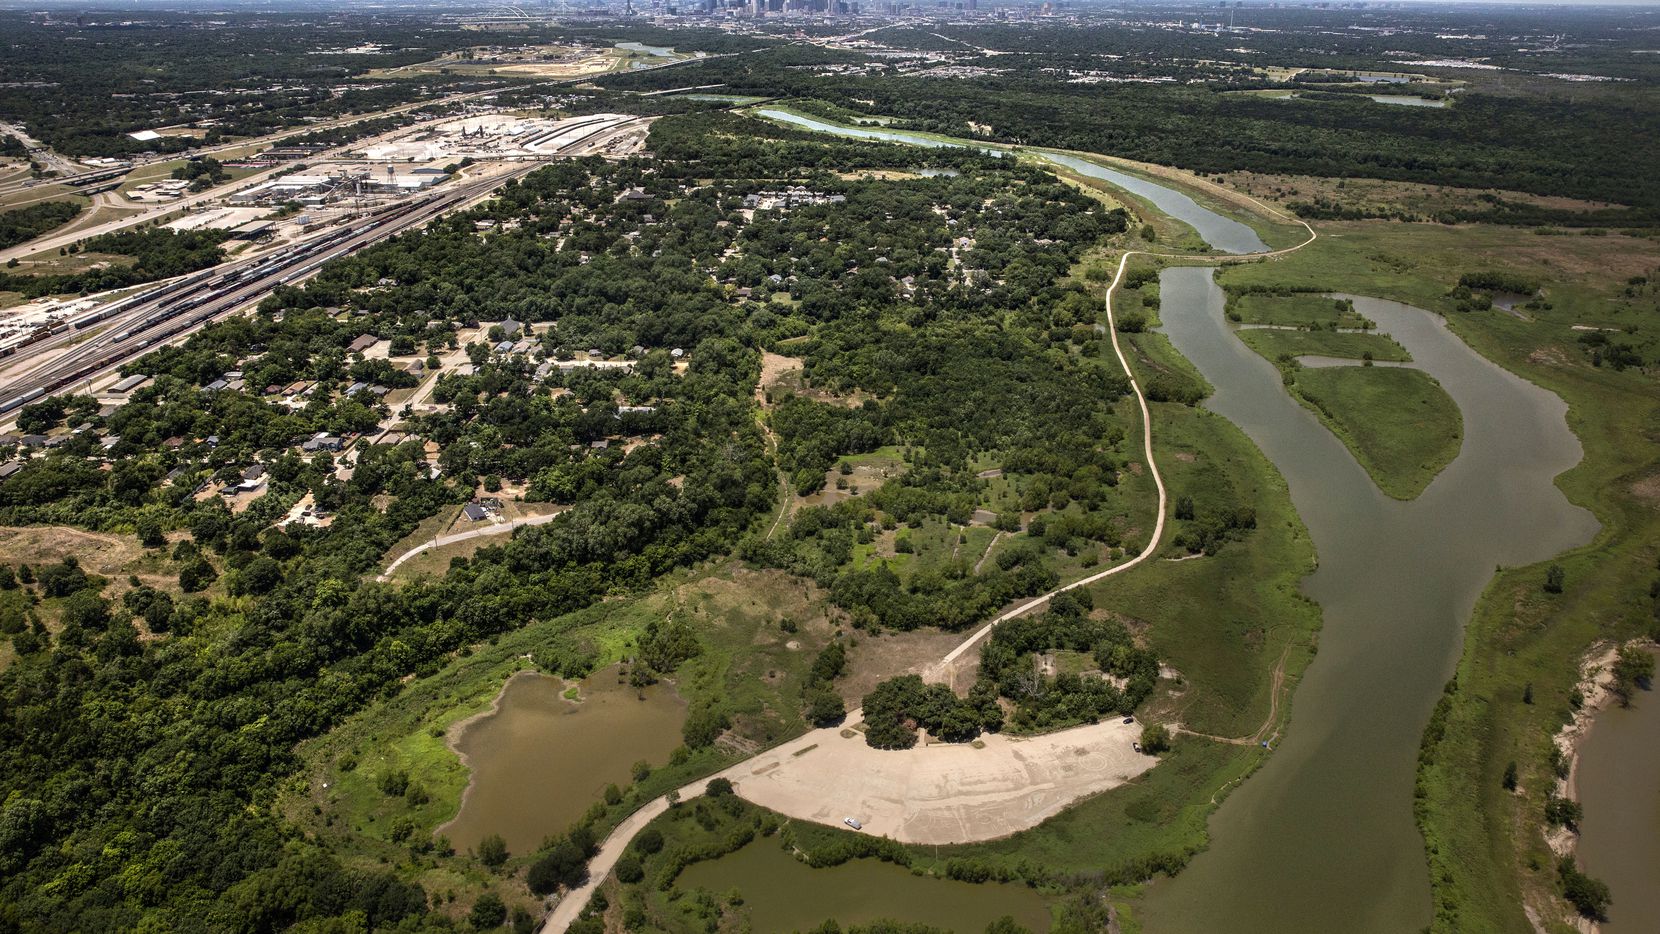 An overhead view of the Joppa neighborhood in southeast Dallas on Thursday, June 18, 2020.